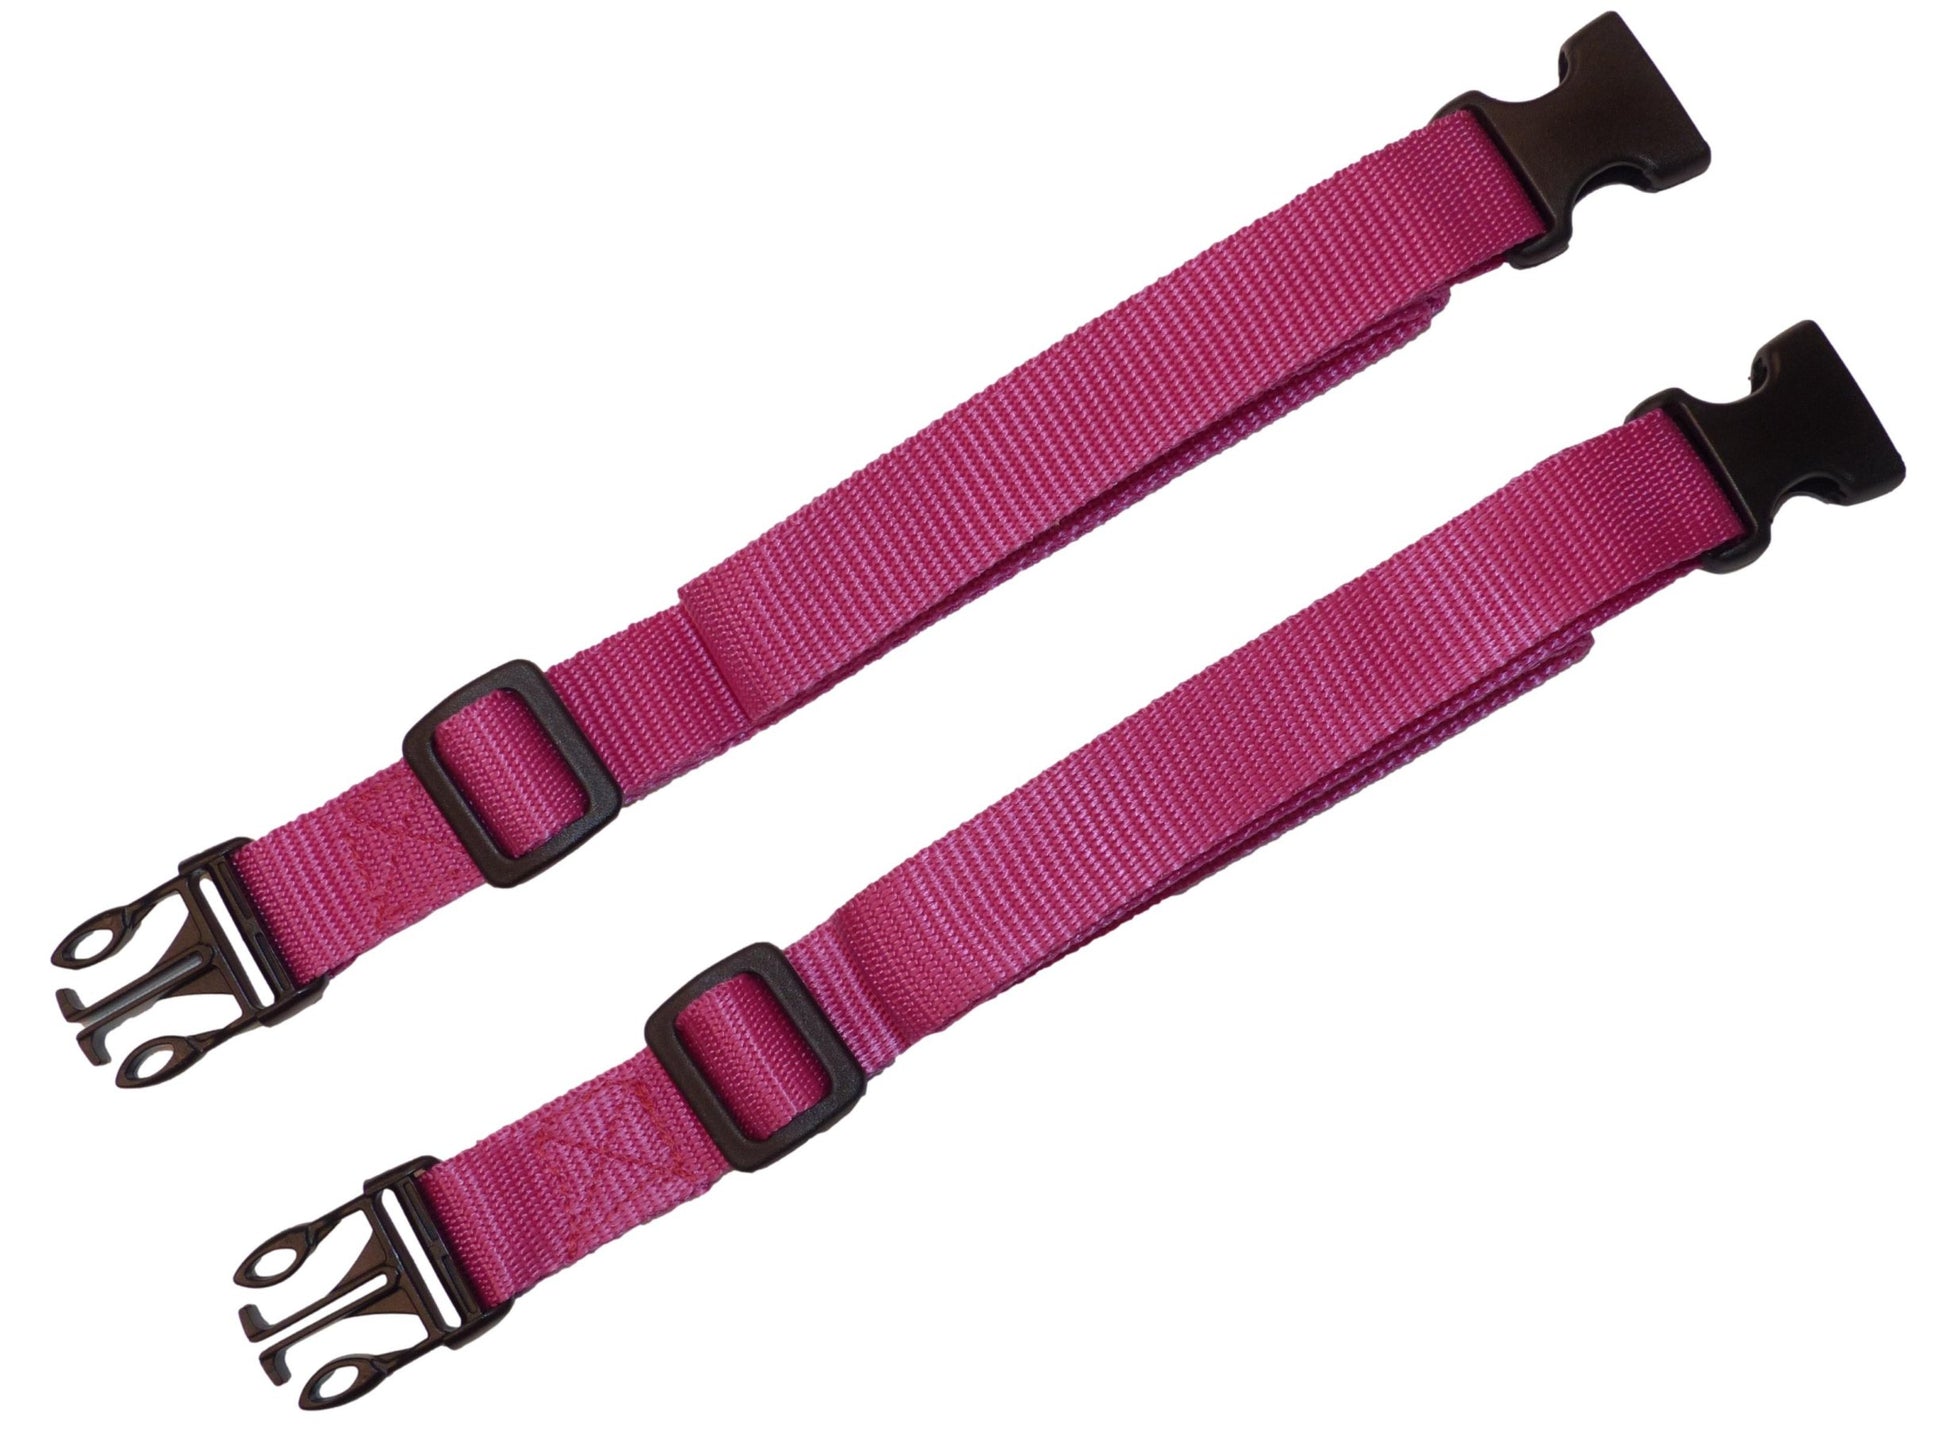 25mm Webbing Strap with Quick Release & Length-Adjusting Buckles (Pair) in pink